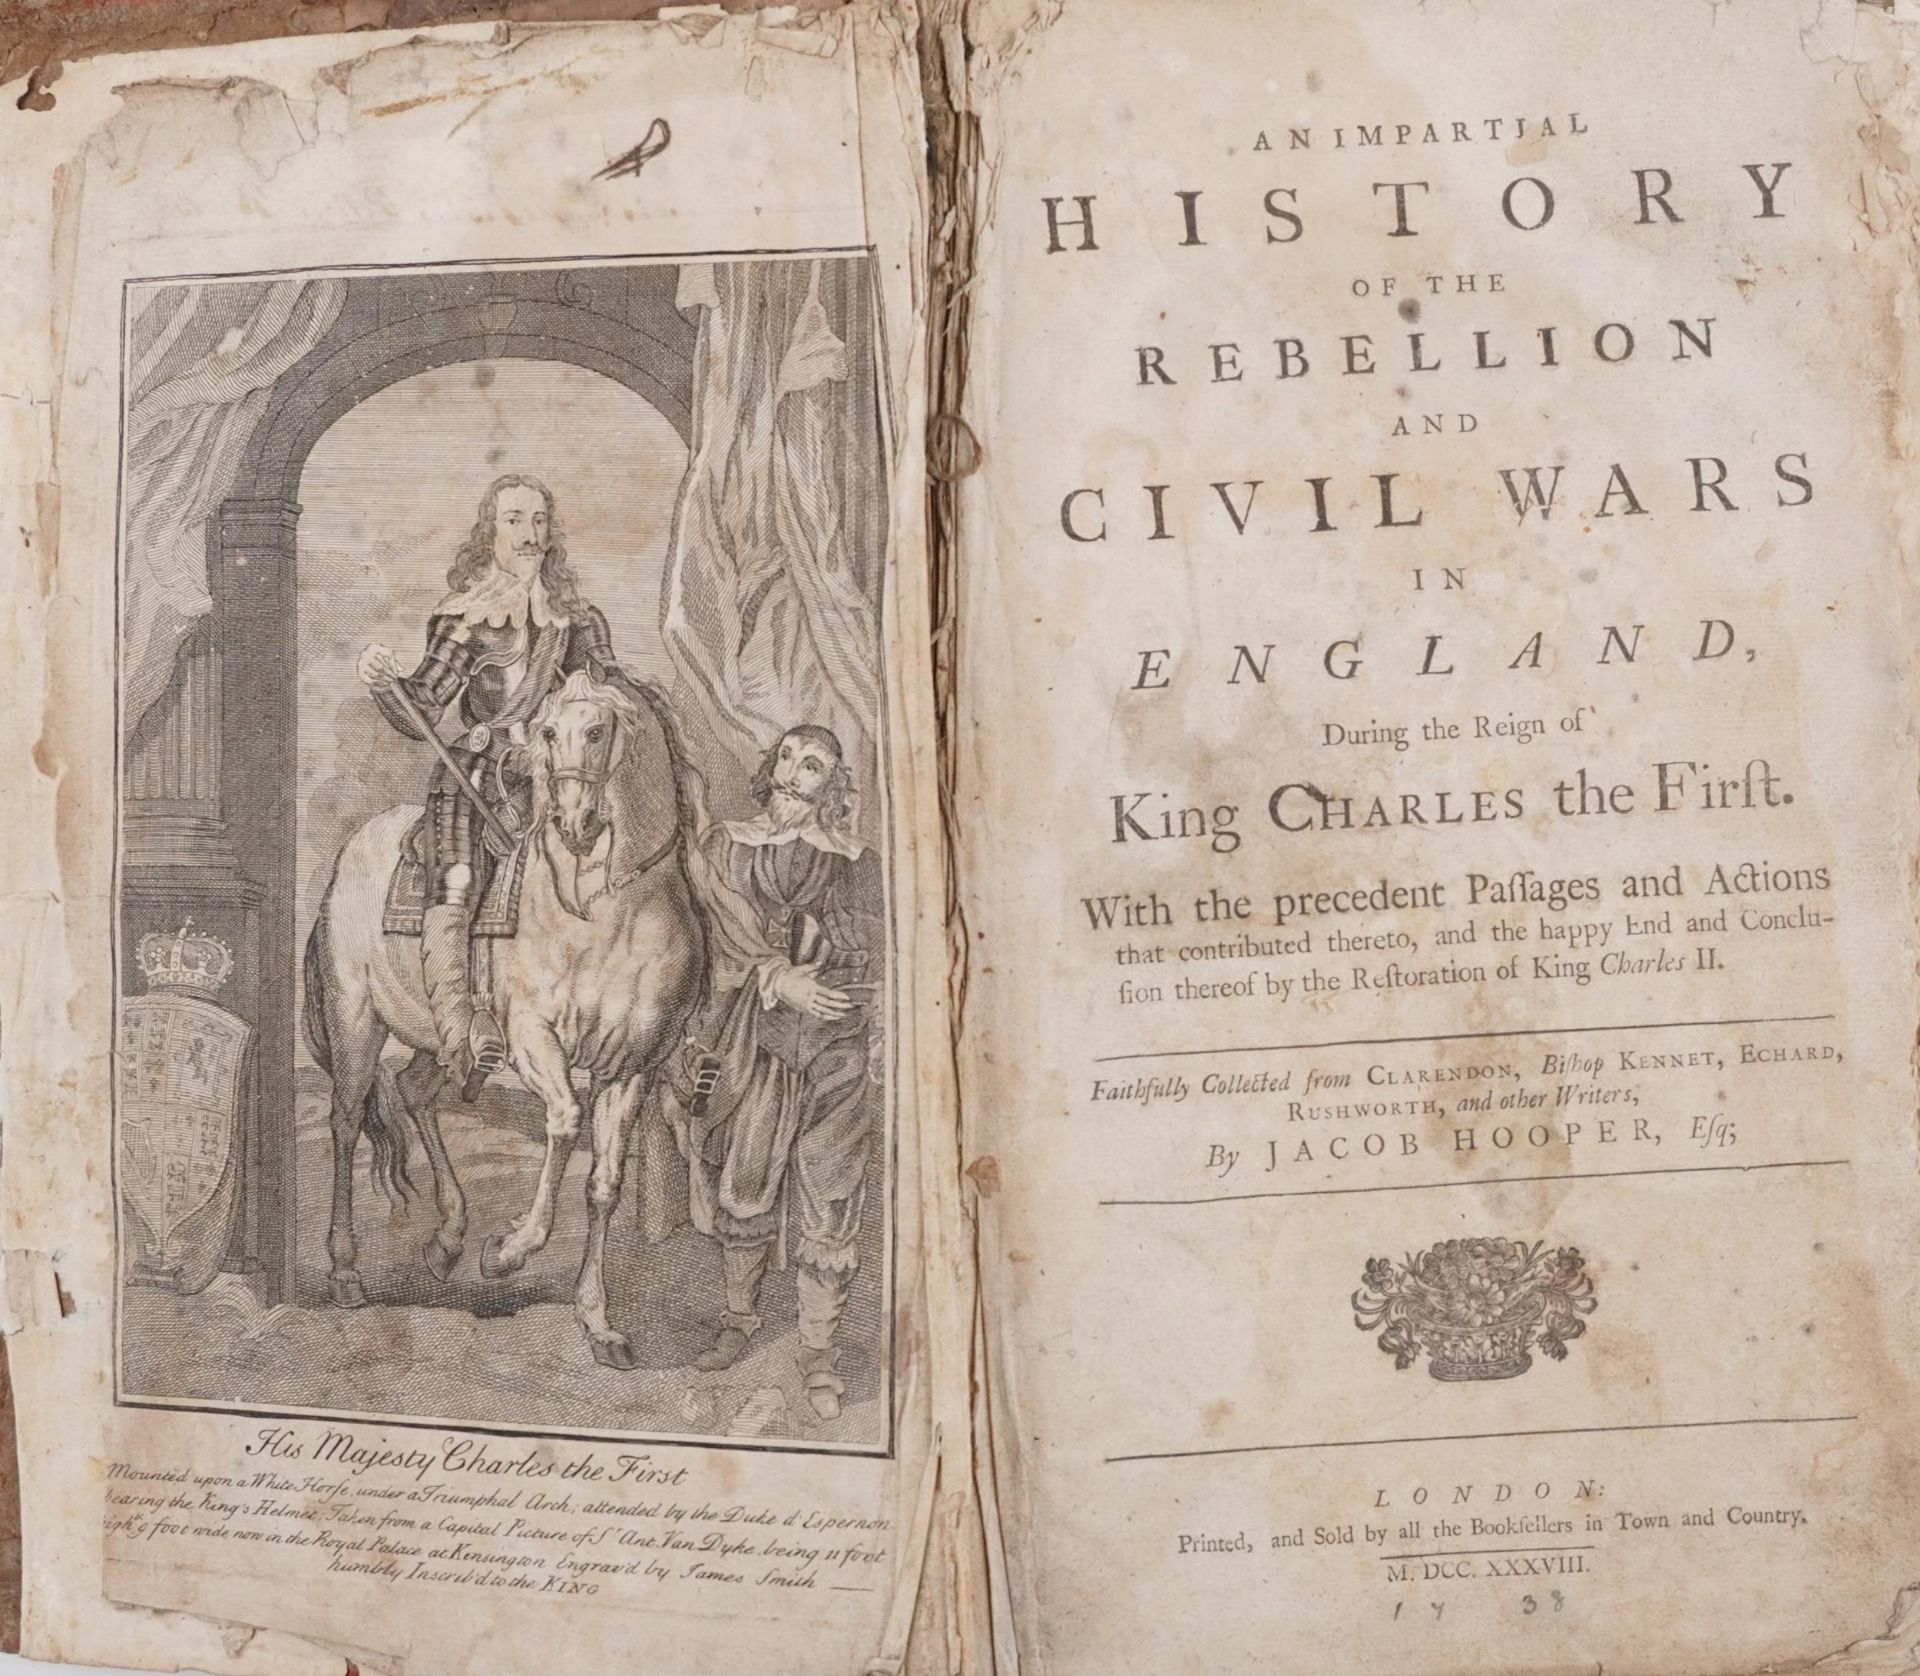 Impartial History of the Rebellion and Civil Wars in England During the Reign of Charles I, early - Bild 2 aus 3